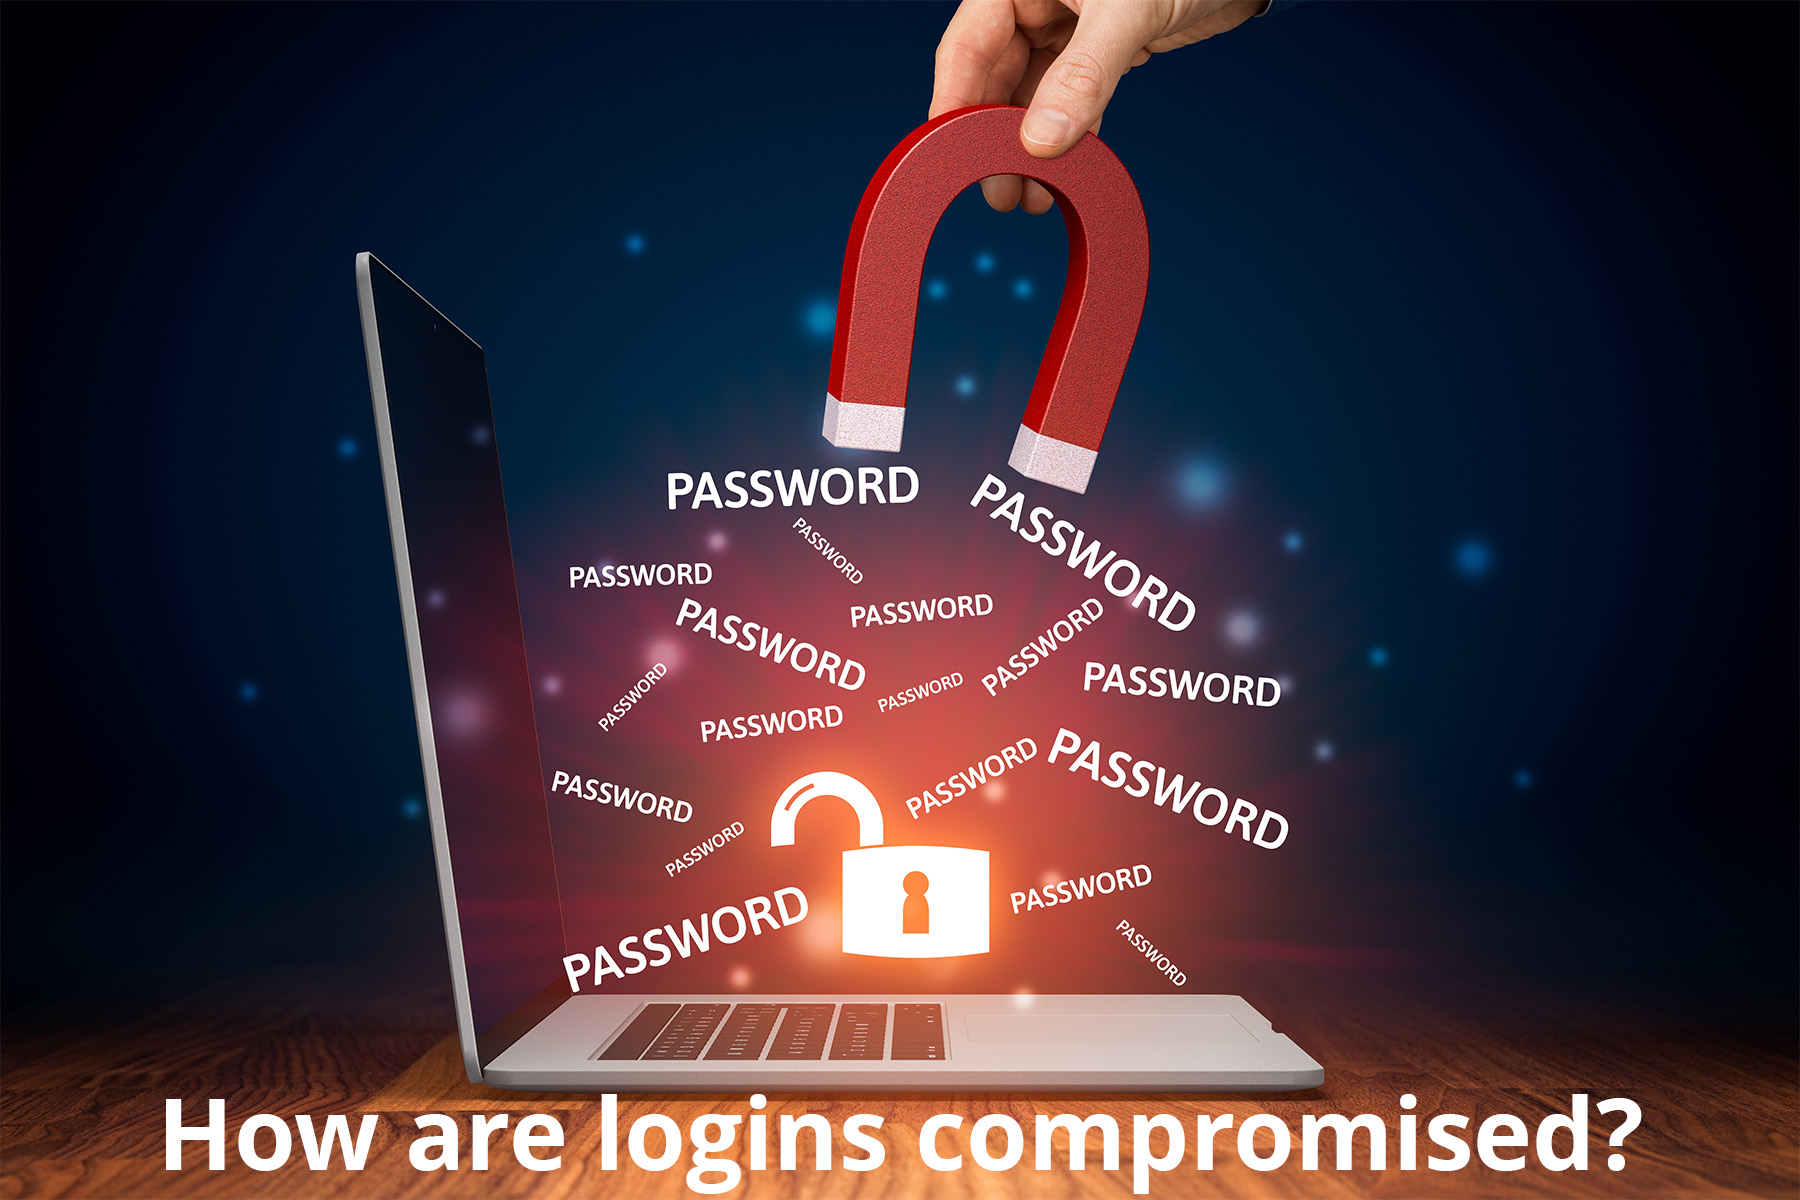 How are logins compromised